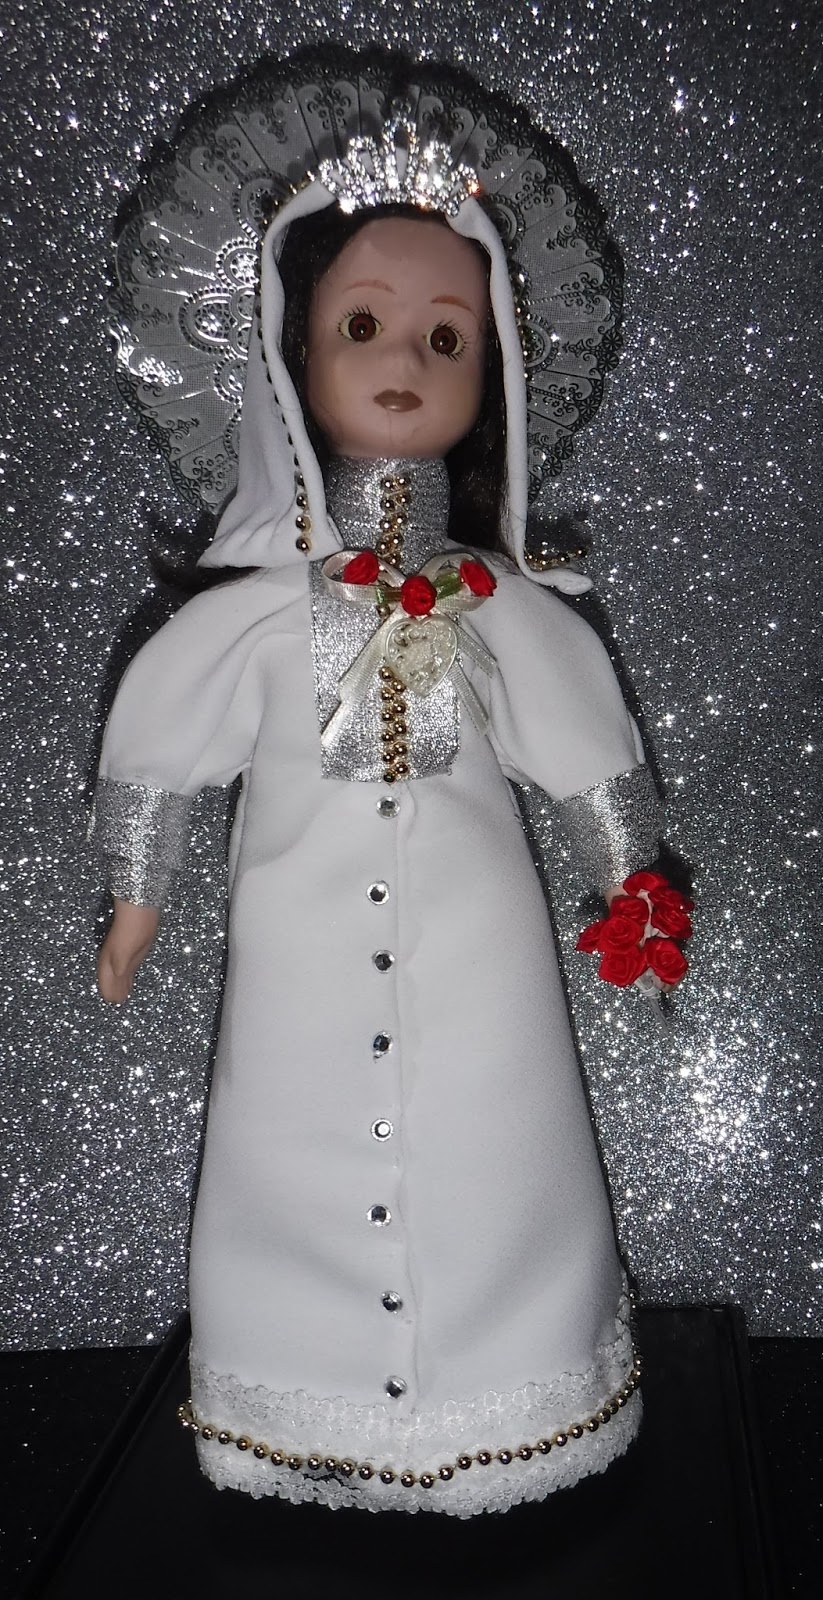 Religion and Dolls - as seen by Mary O'Neill Doll Museum